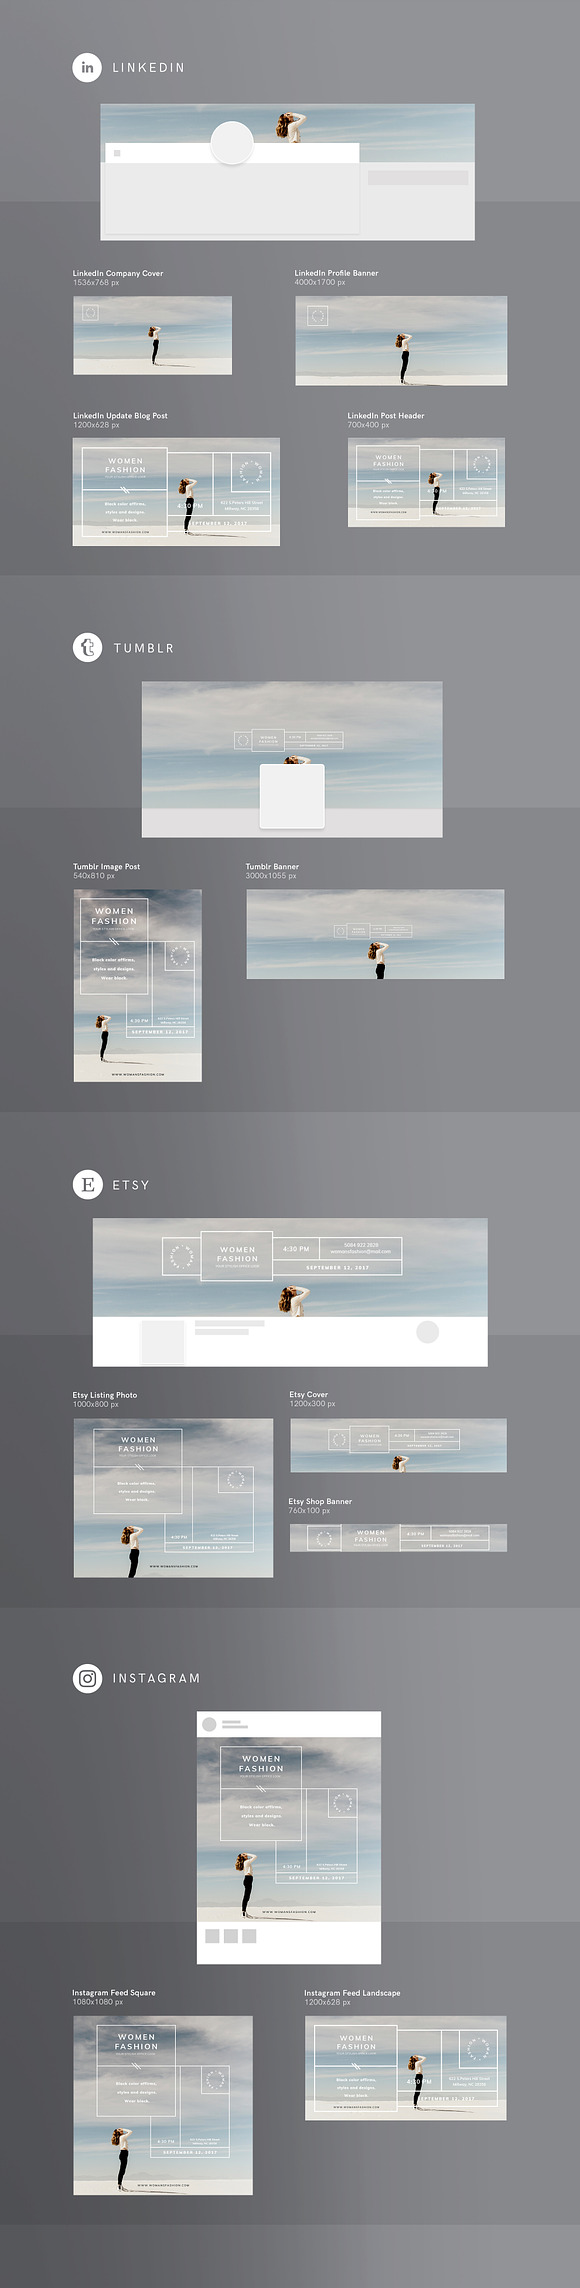 Social Media Pack | Women Fashion in Social Media Templates - product preview 2